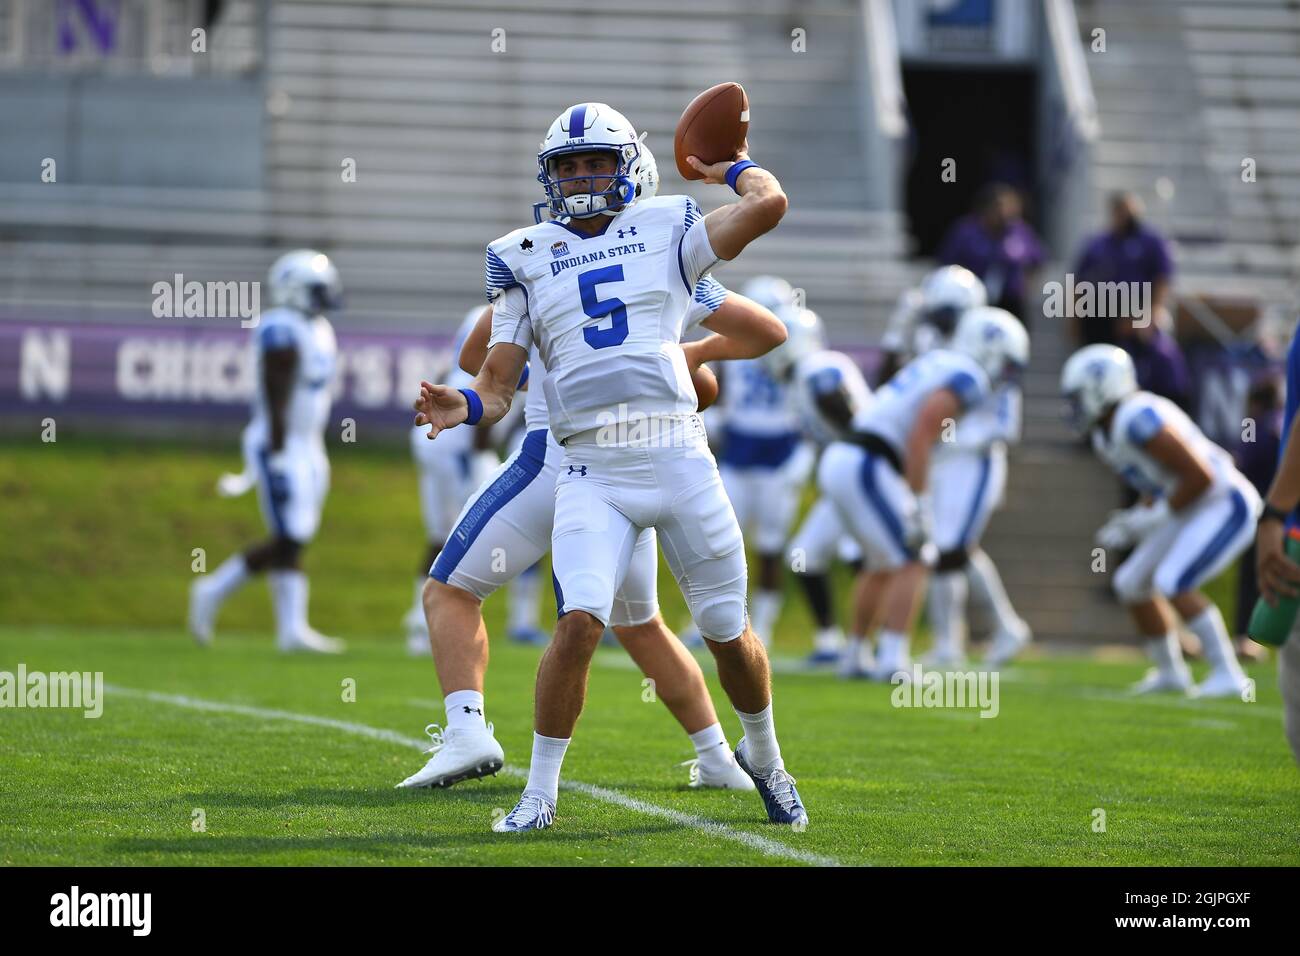 Evanston, Illinois, USA. 11th Sep, 2021. Anthony Thompson #5 of the Indiana State Sycamores in action during the NCAA football game between the Northwestern Wildcats vs Indiana State Sycamores at Ryan Field in Evanston, Illinois. Dean Reid/CSM/Alamy Live News Stock Photo